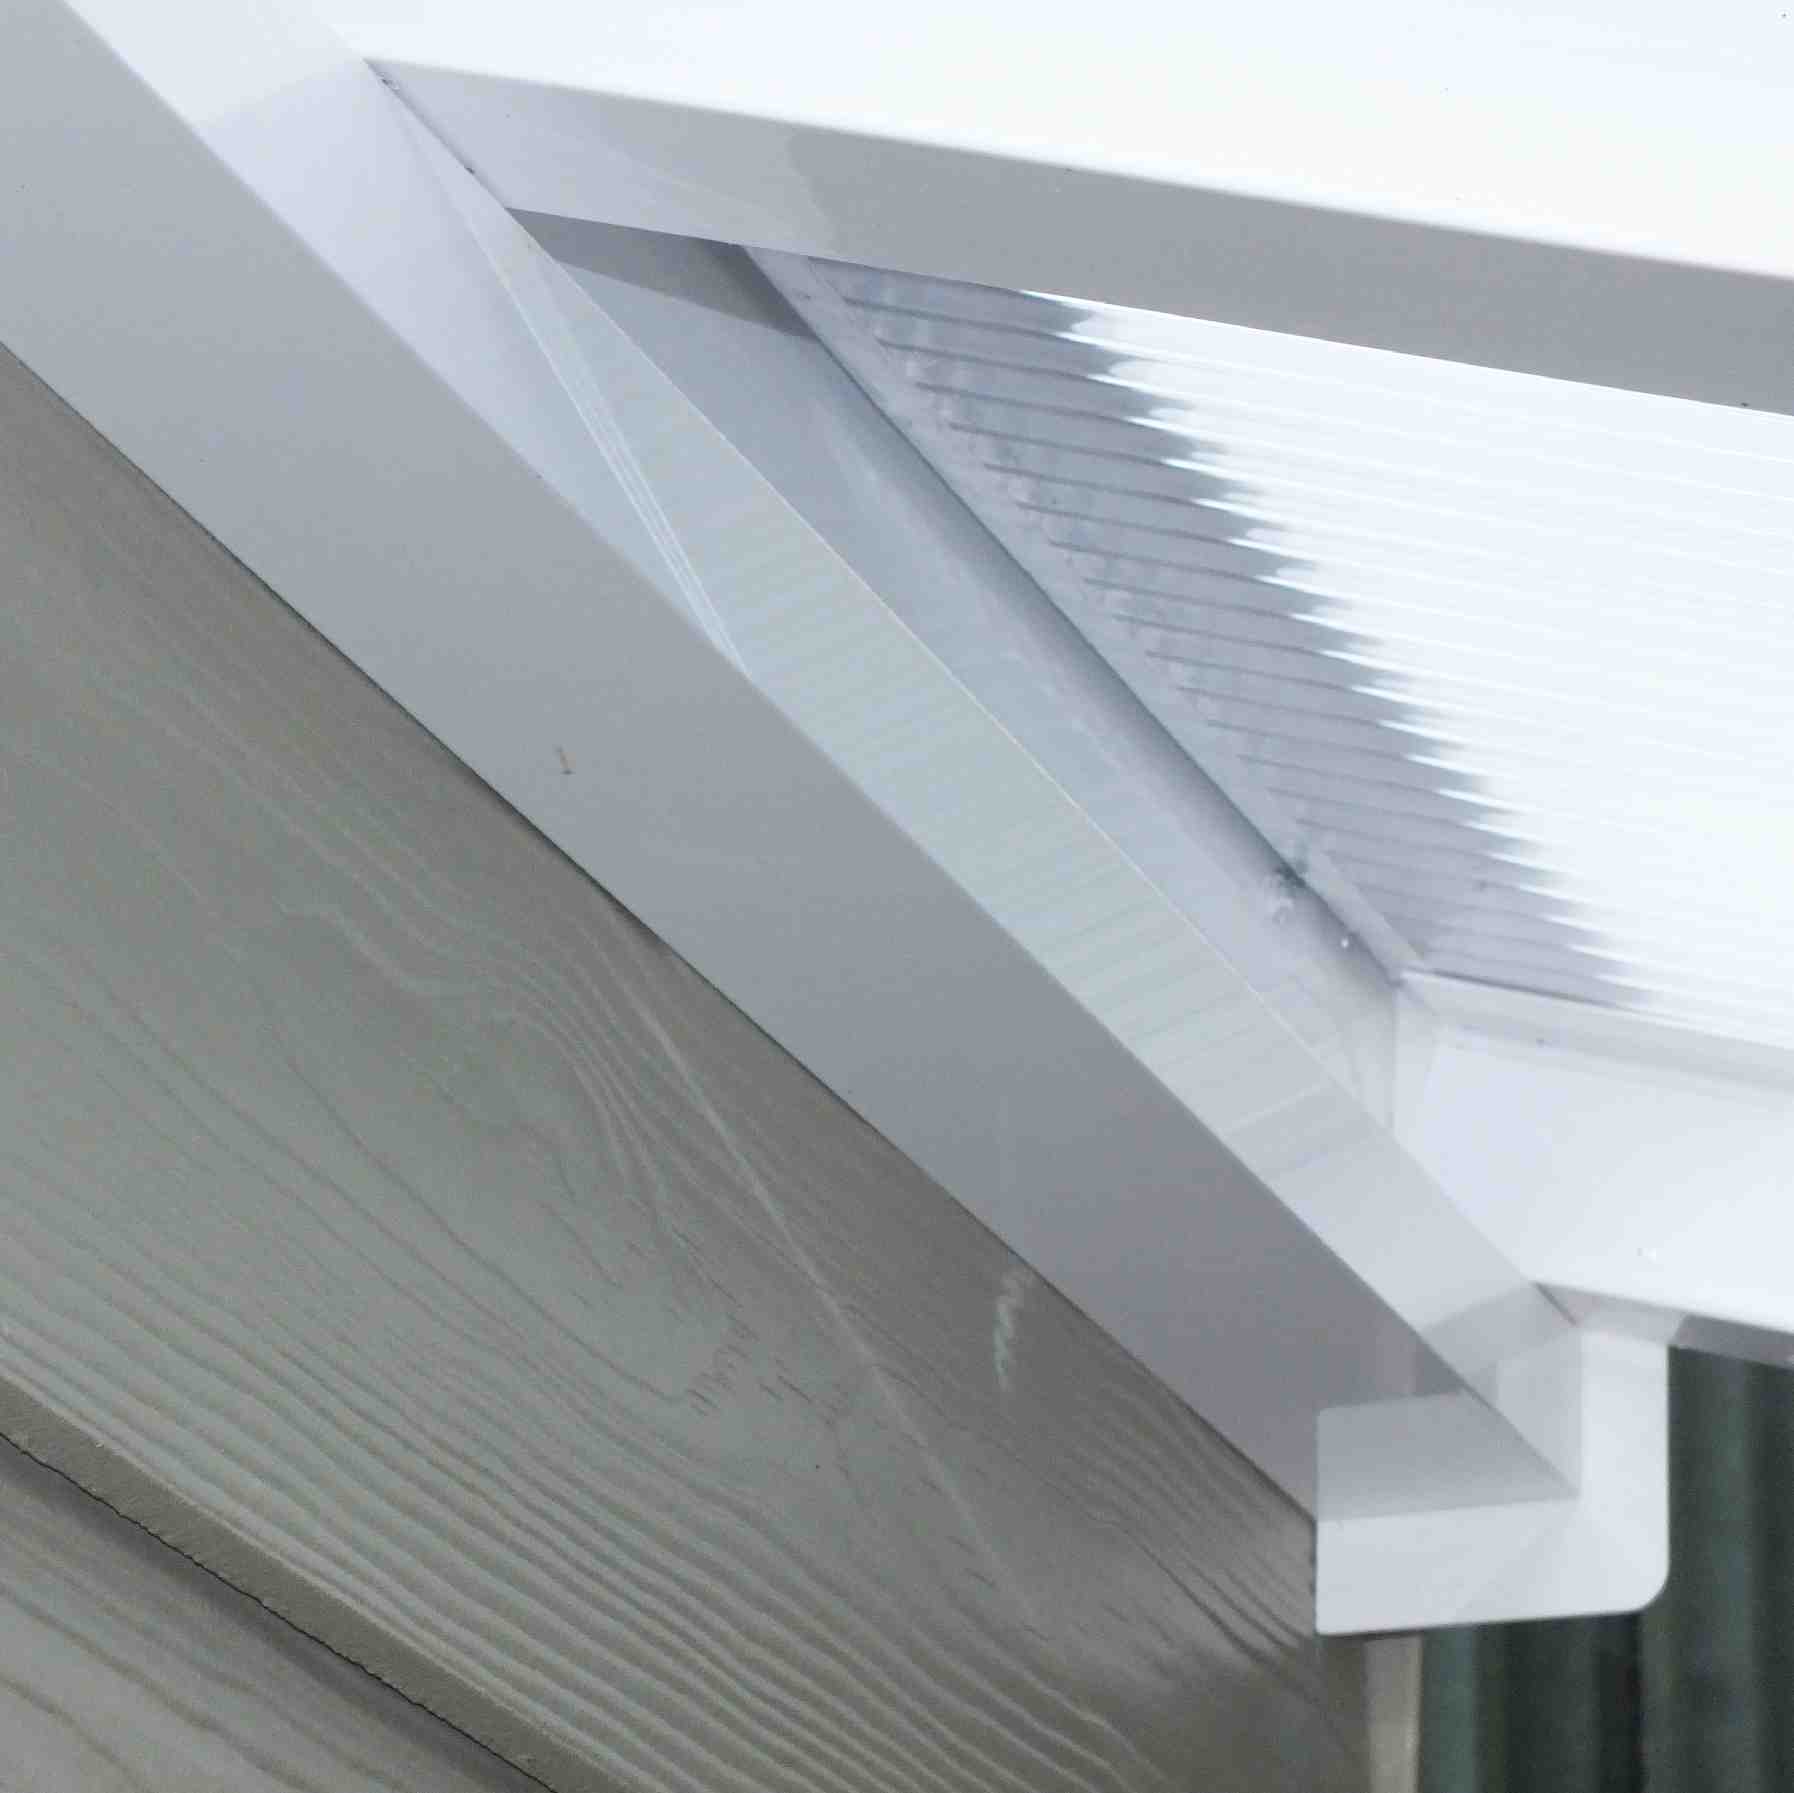 Great deals on Omega Verandah White with 16mm Polycarbonate Glazing - 2.8m (W) x 3.5m (P), (2) Supporting Posts